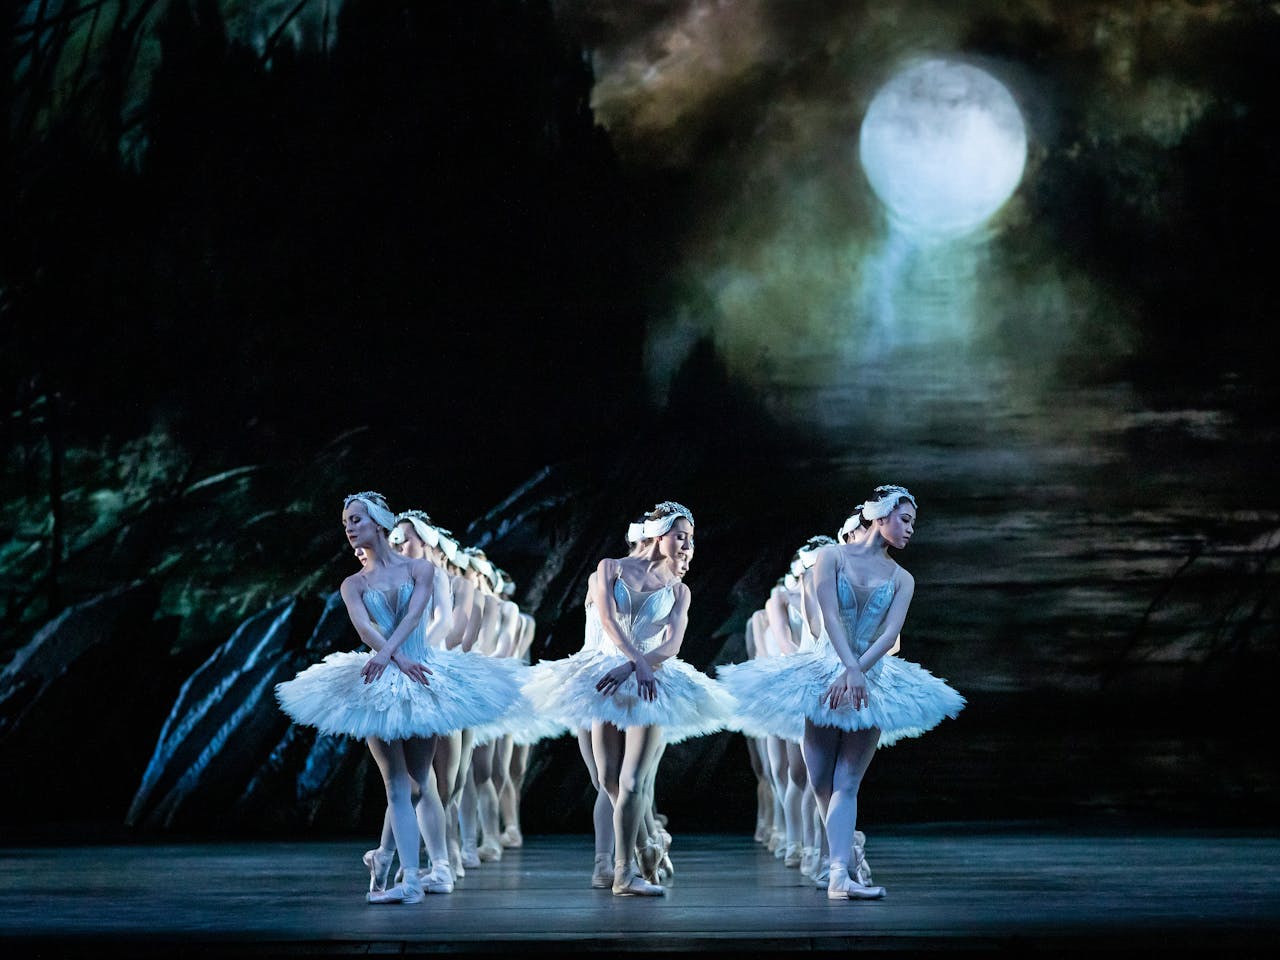 A group of Royal Ballet artists dance onstage in white tutus in a performance of Swan Lake. The dancers are dressed white feathers and matching headresses. The set has a glowing white moon and the dancers are arranged in three lines.